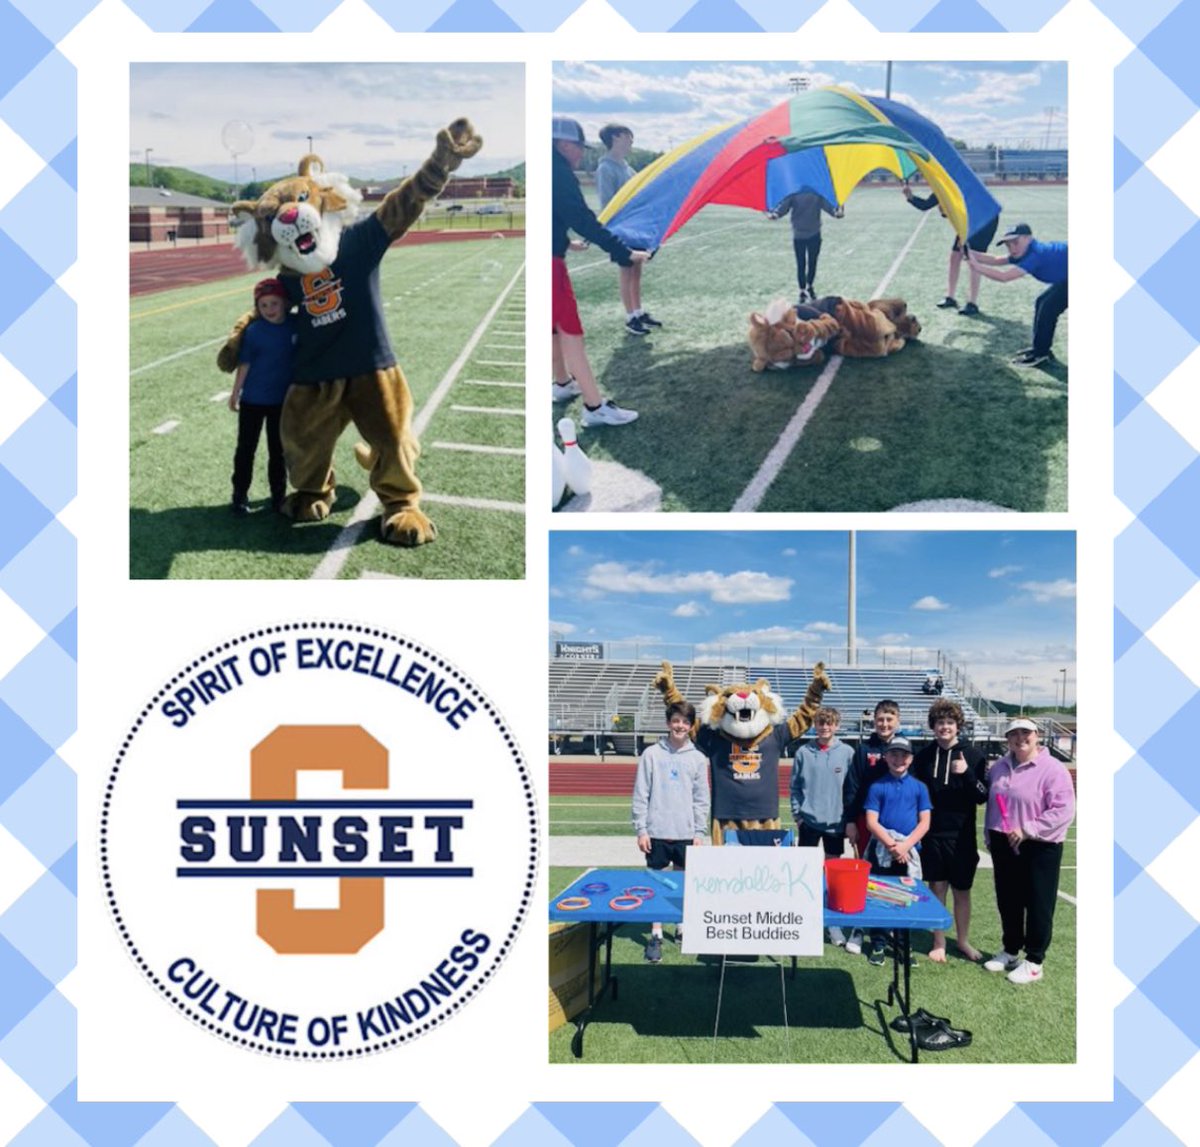 SMS Best Buddies, THANK YOU for your participation in Kendall’s K today! We see you, Sabers!!! #CultureOfKindness 🧡💙🧡💙